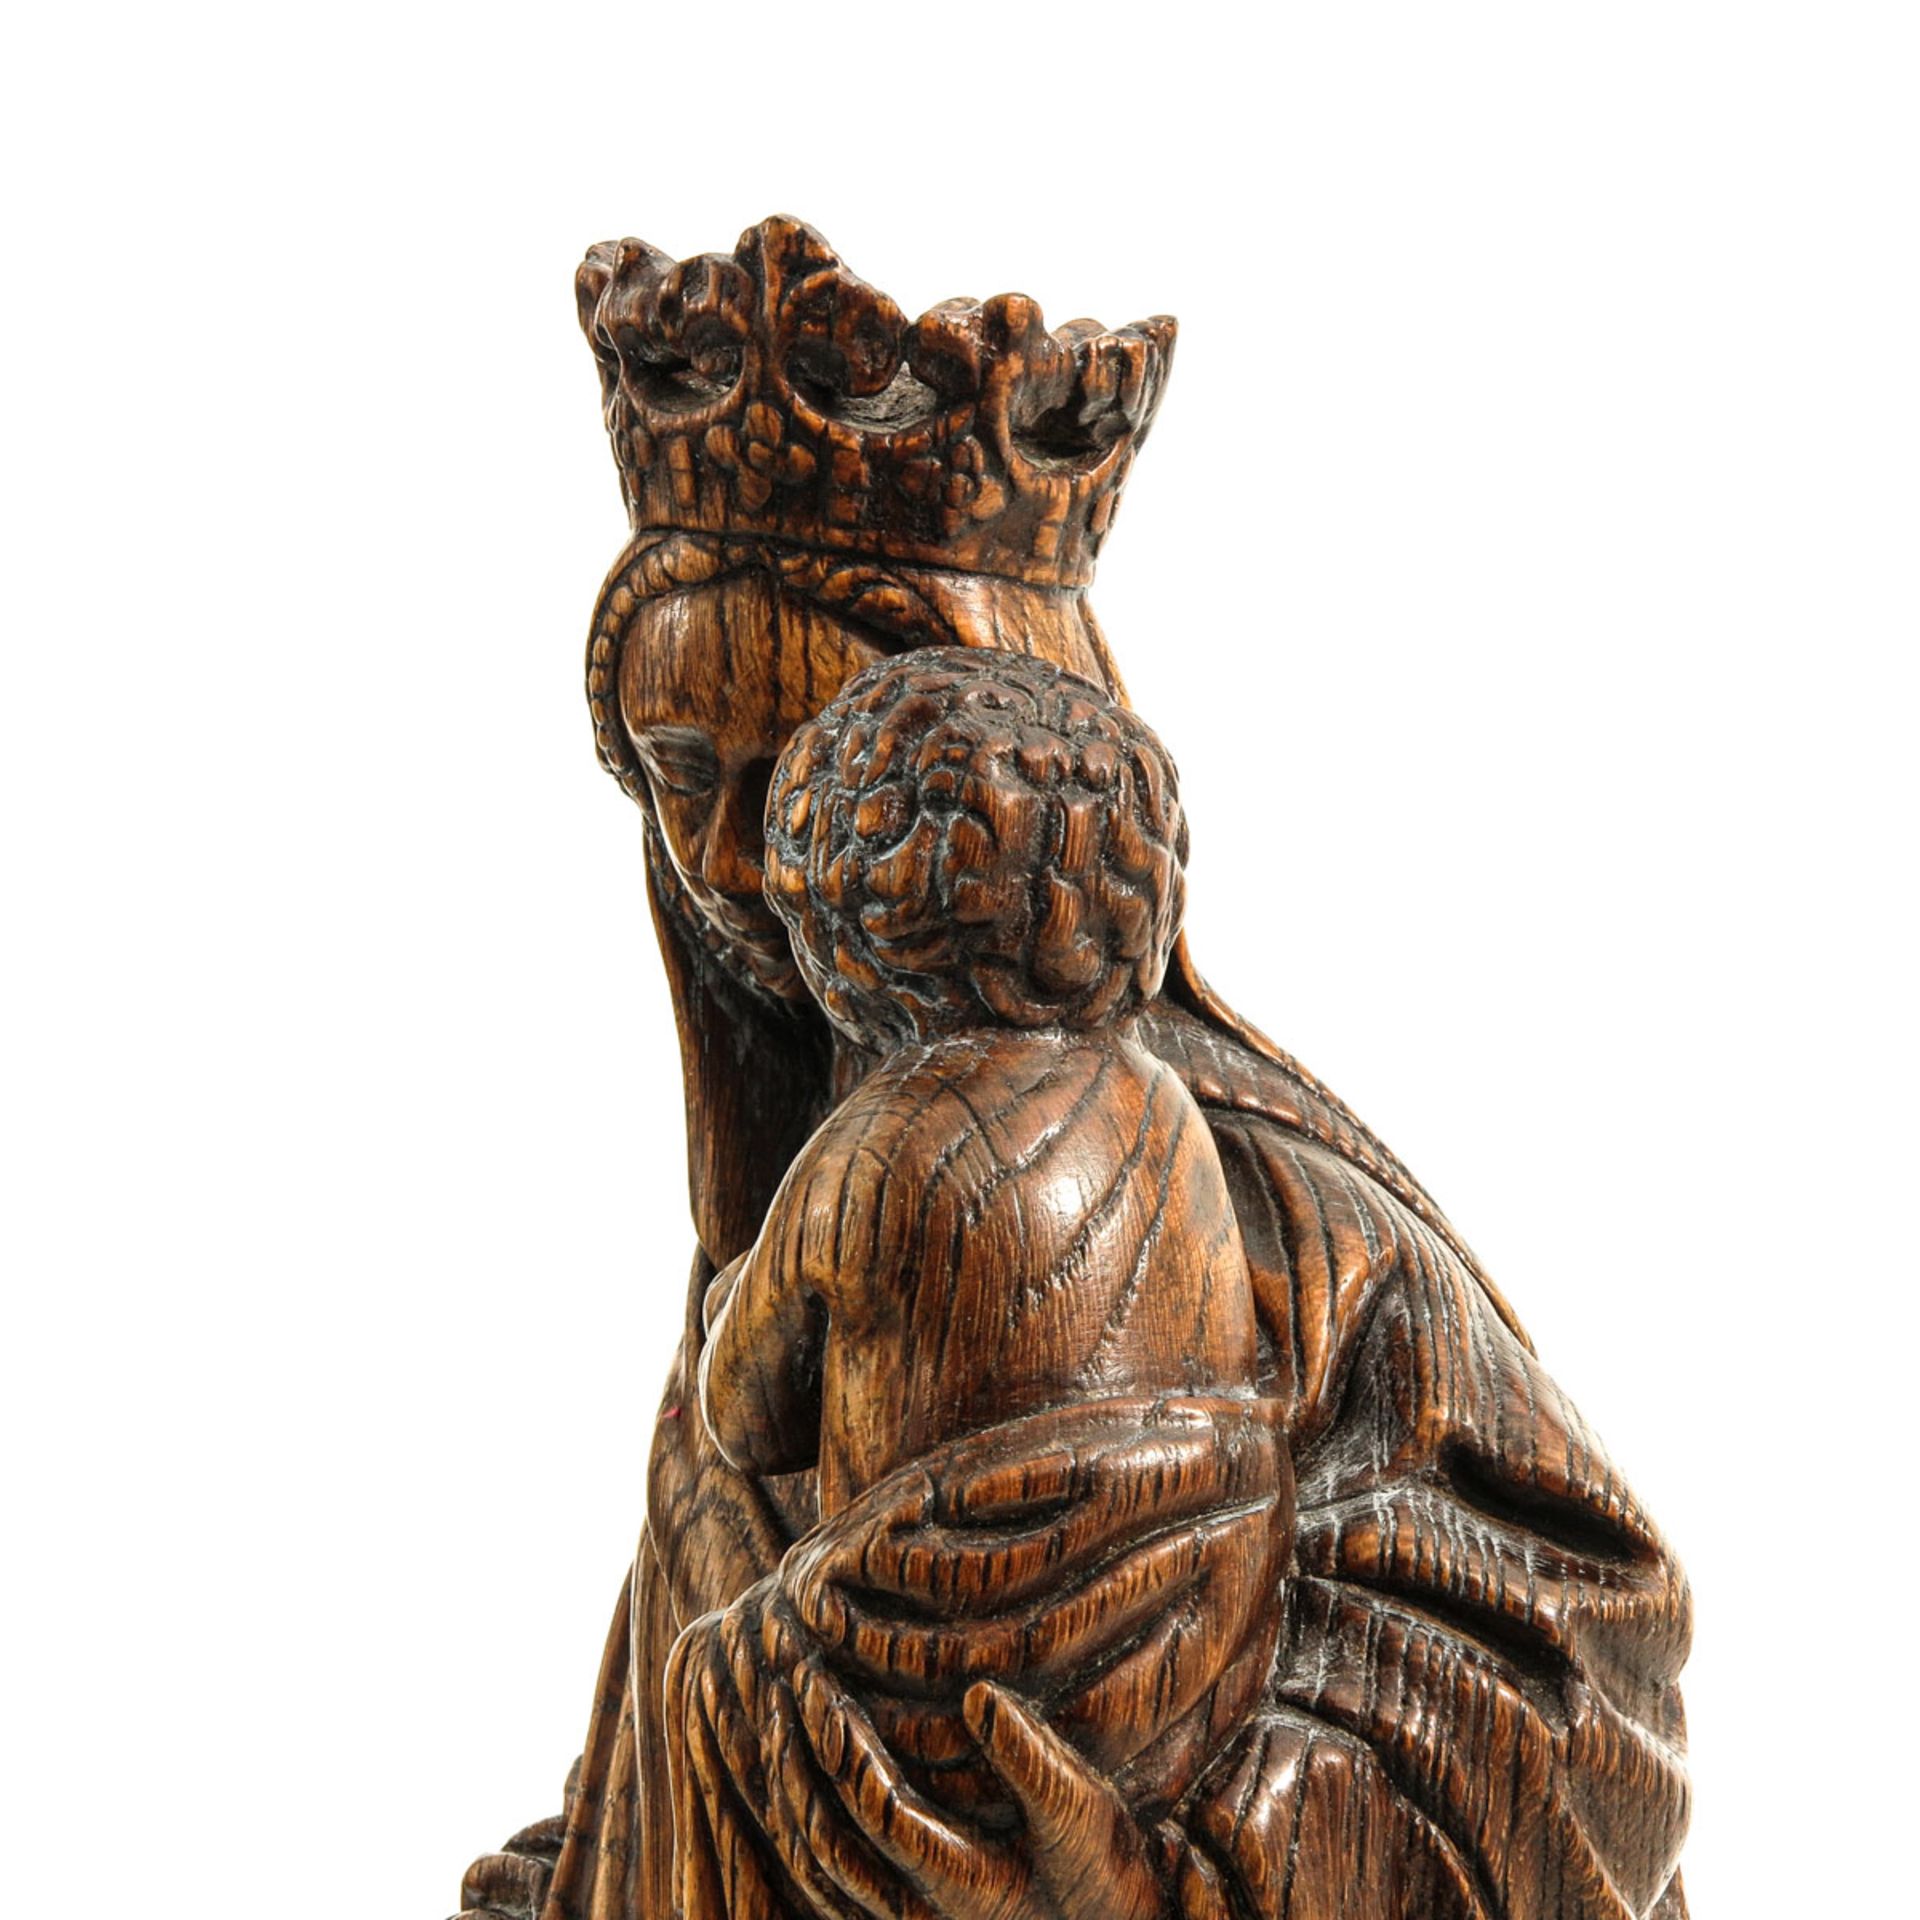 A Wood Sculpture of Madonna with Child - Image 8 of 8